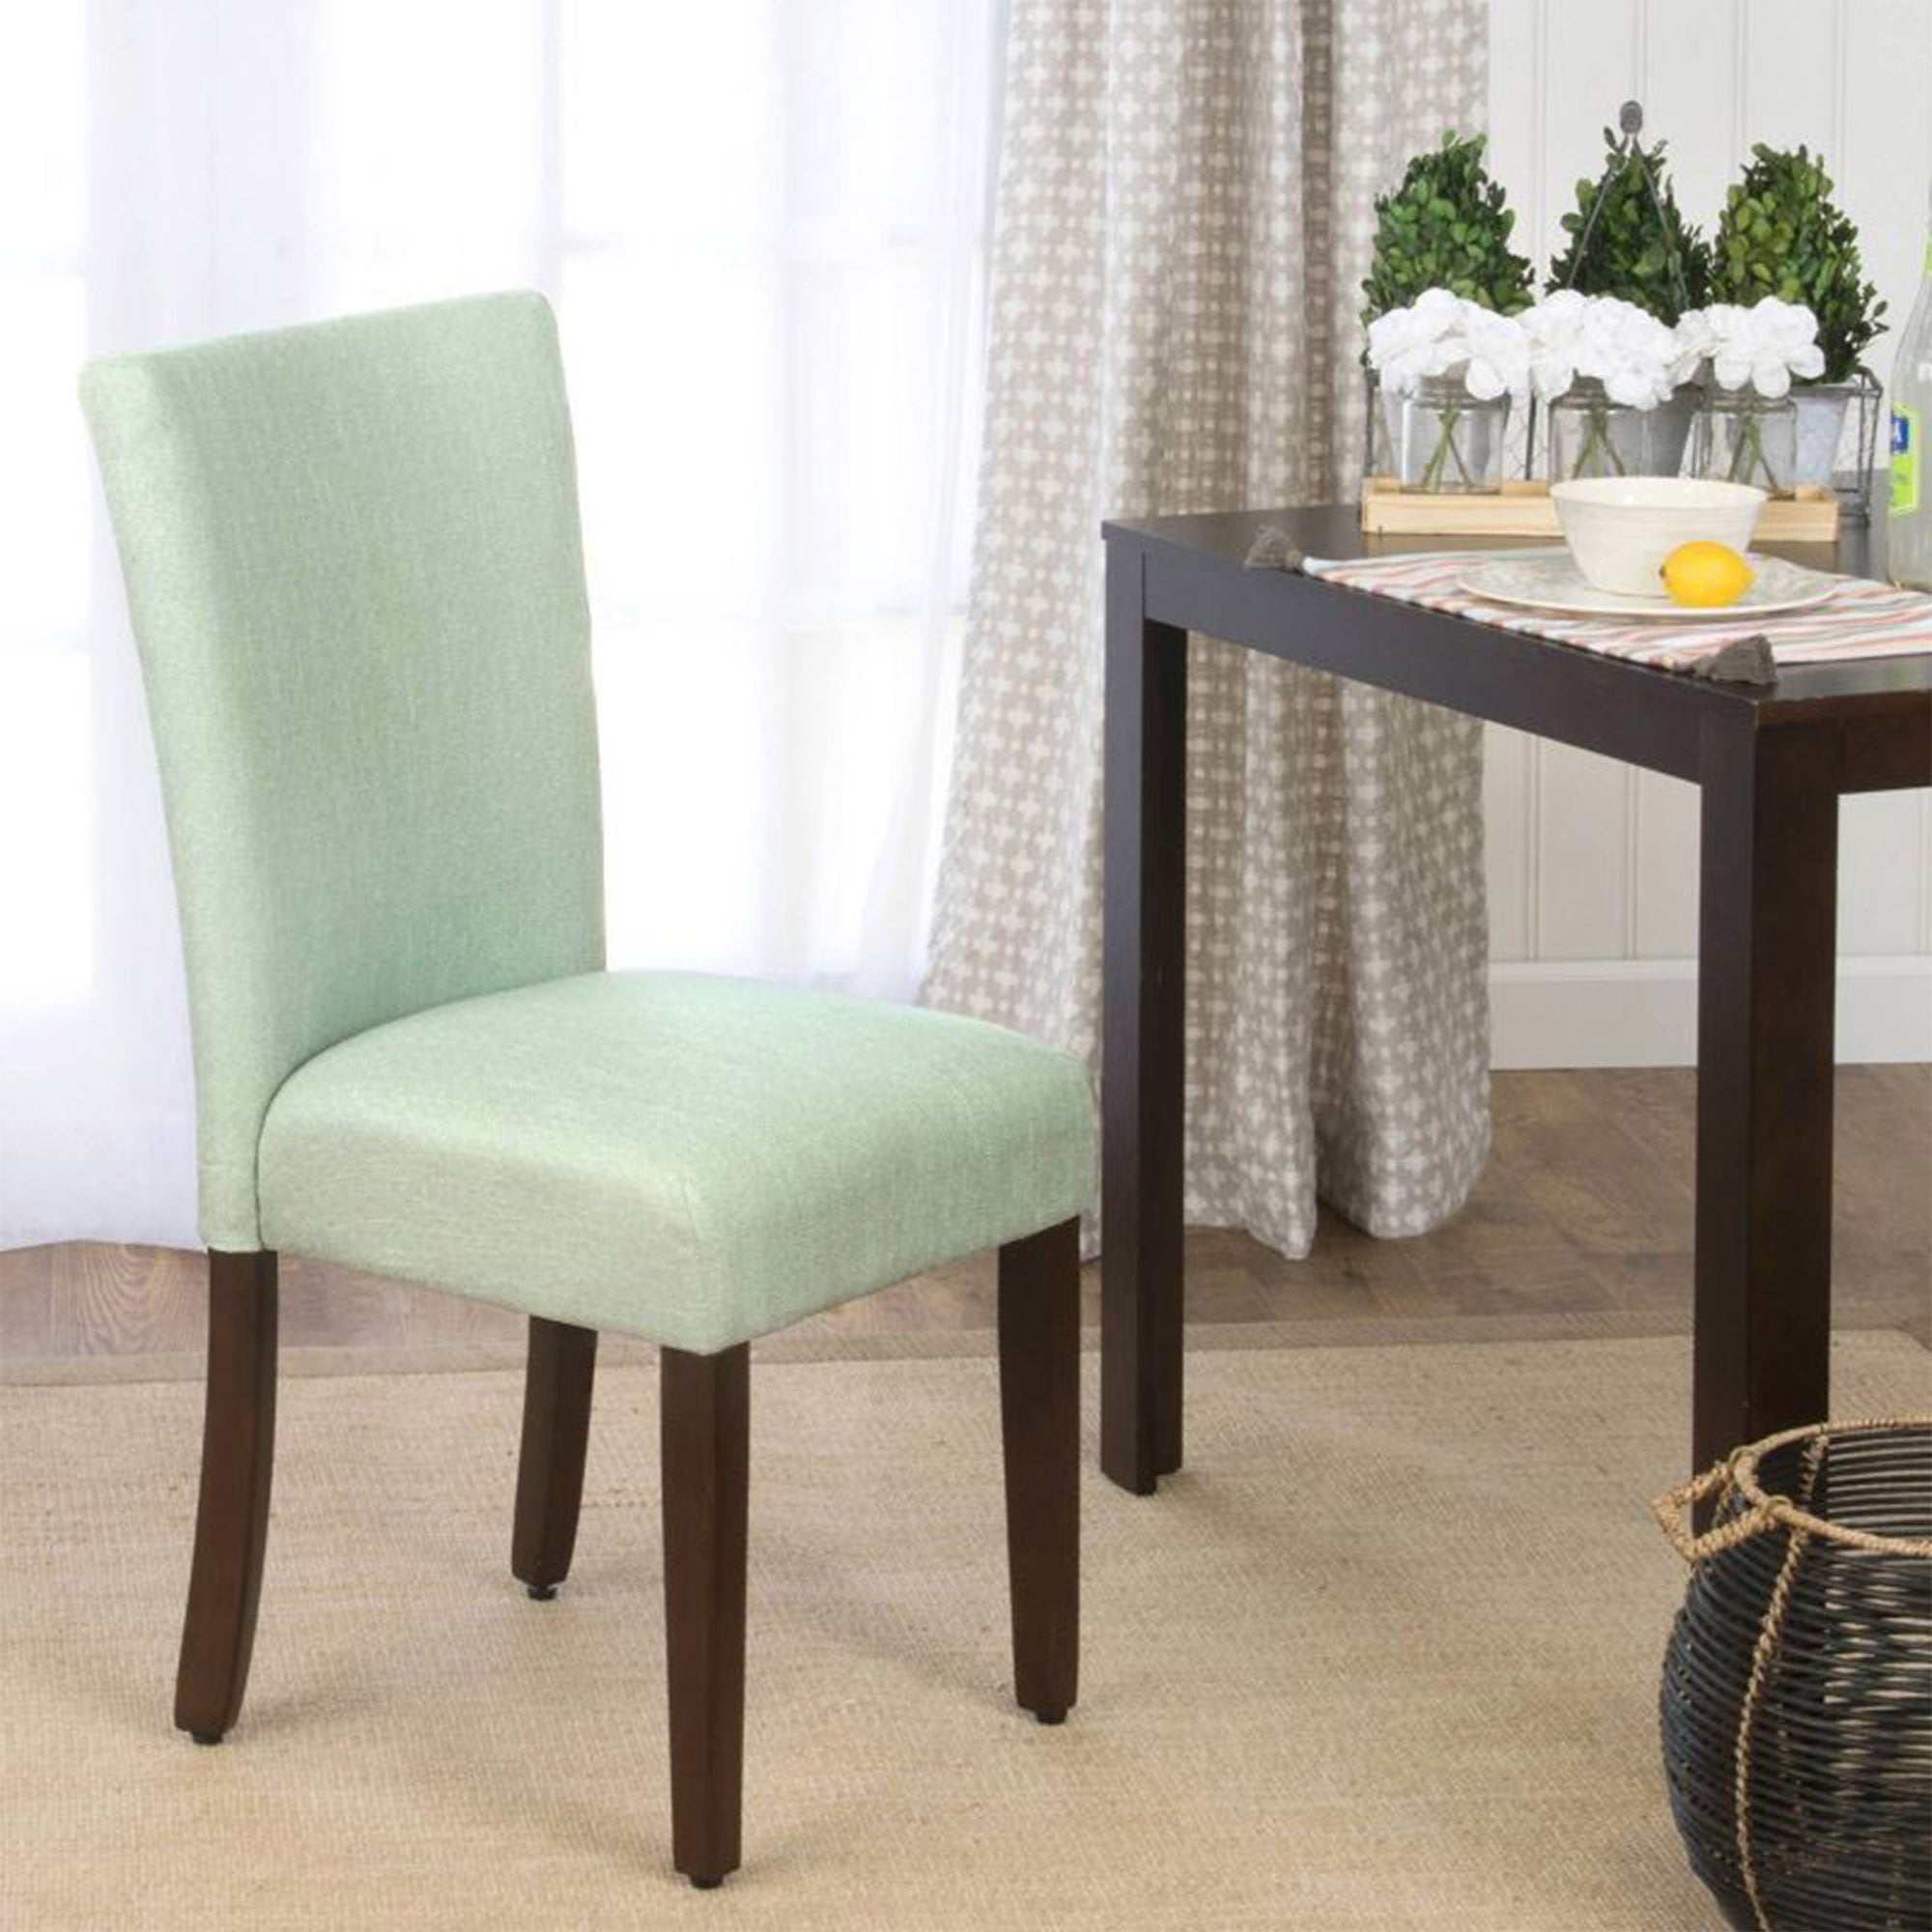 Light Teal Full Back Solid Wood Dining Chair